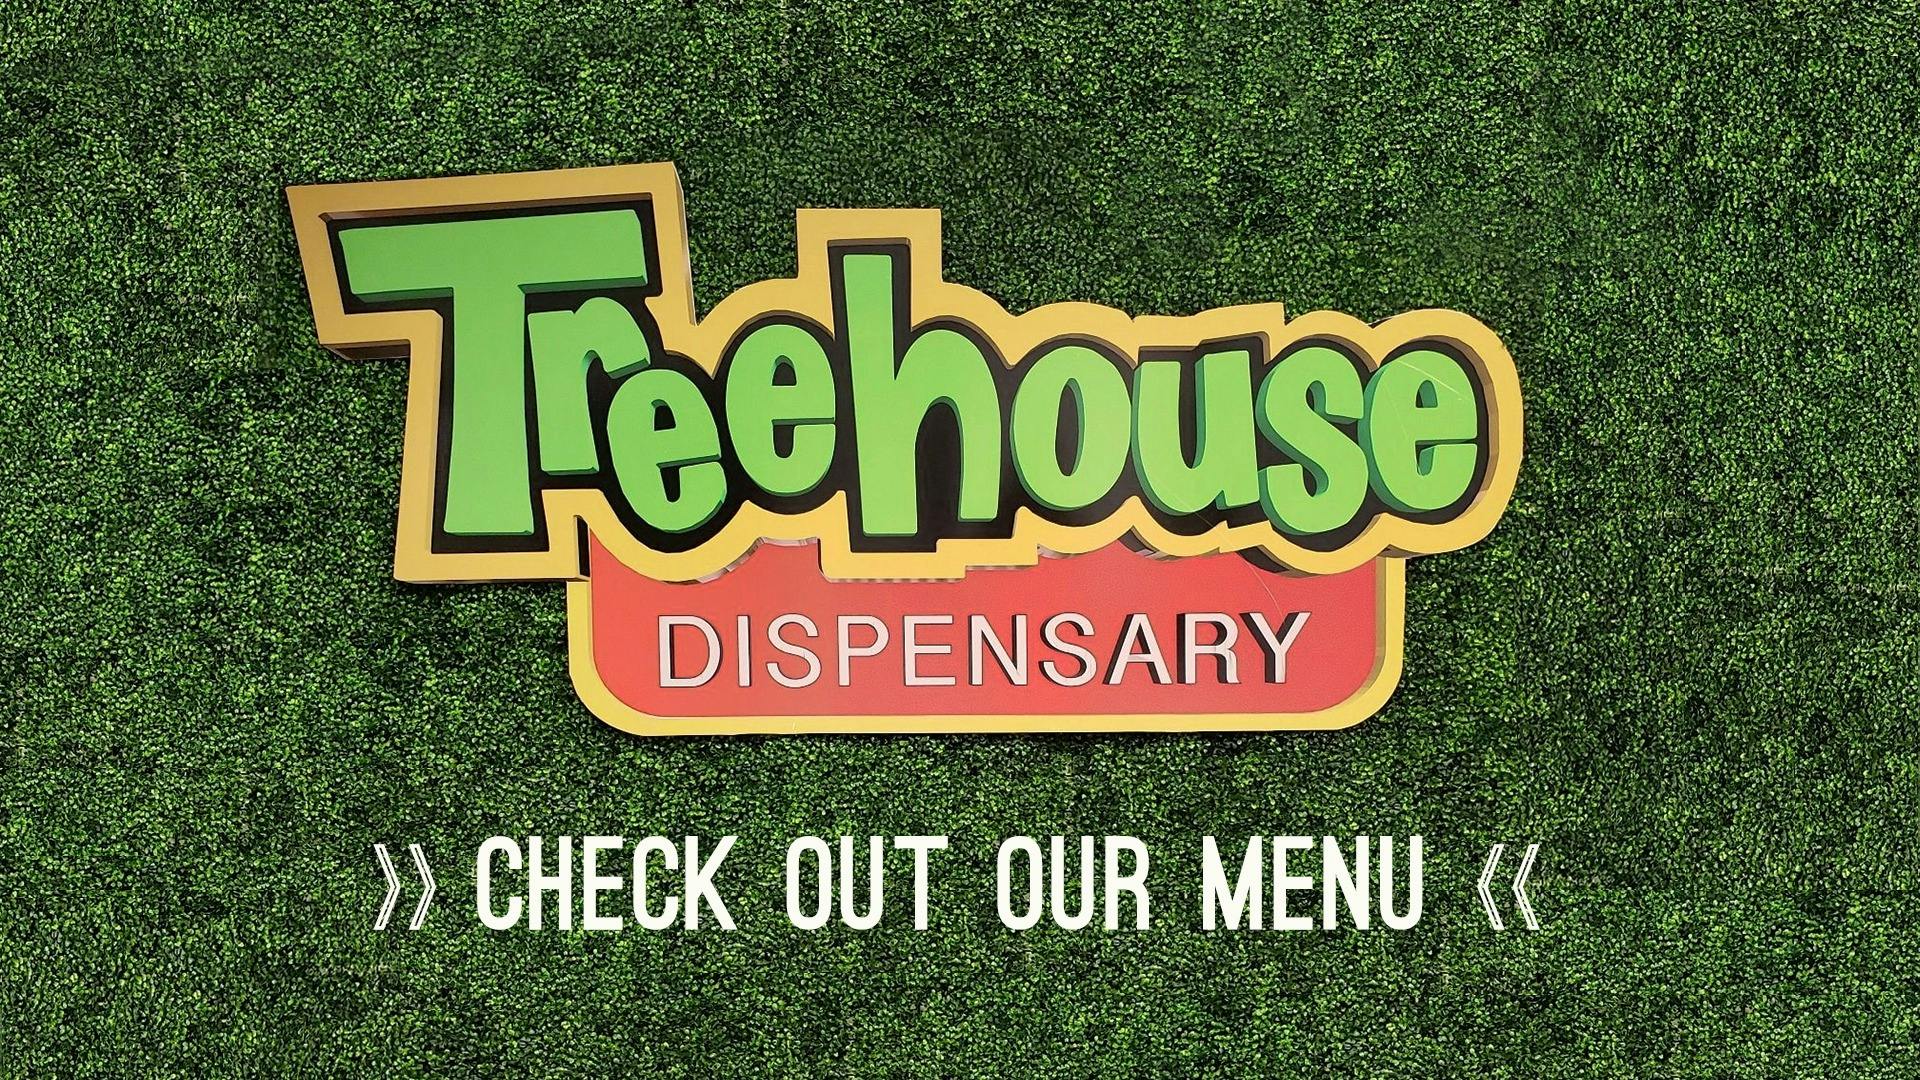 Treehouse Dispensary - Midwest City | Midwest City, OK Dispensary | Leafly